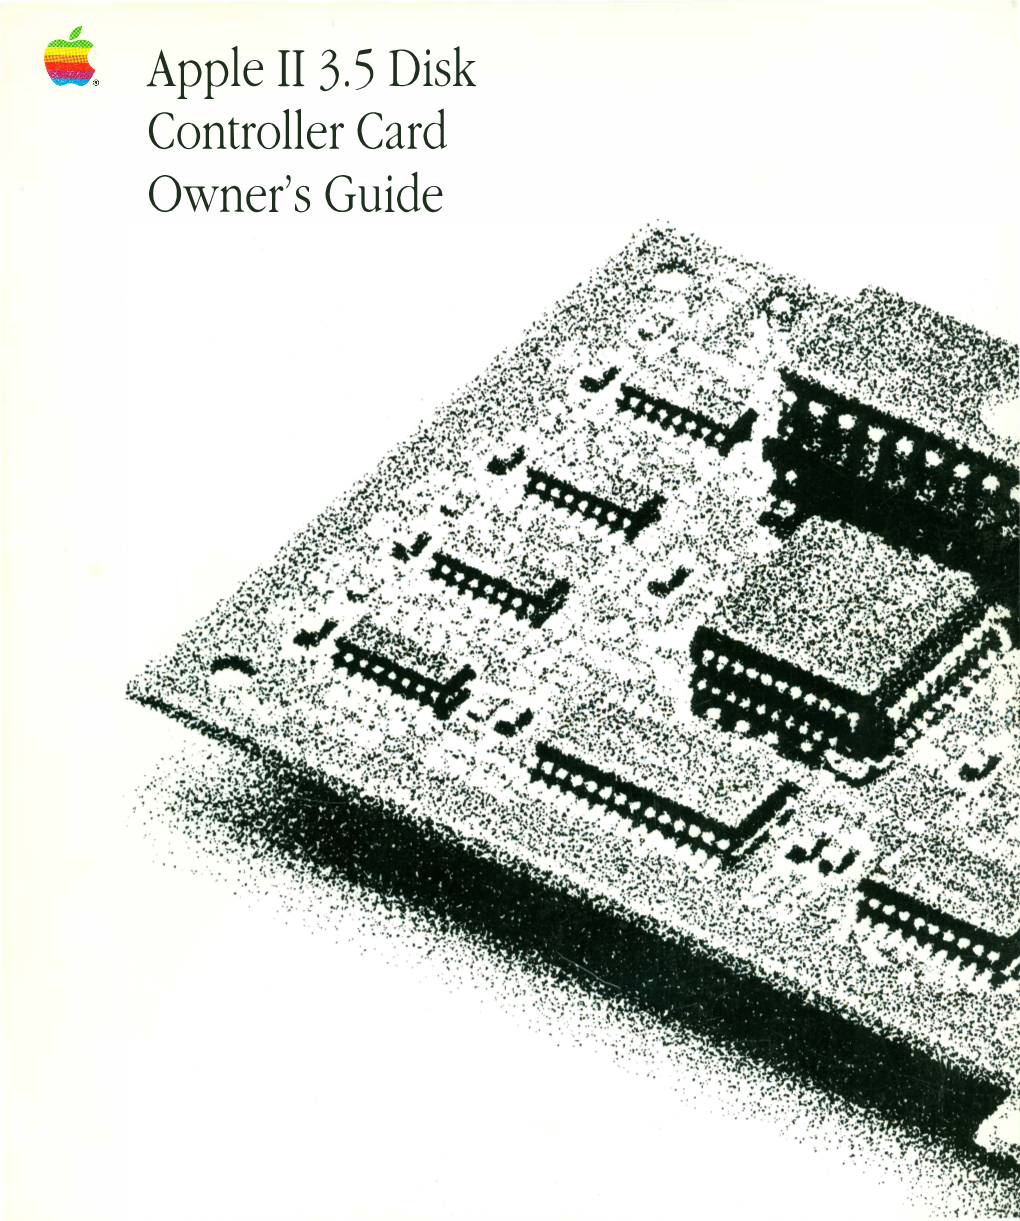 Apple II 3.5 Controller Card Owner's Guide